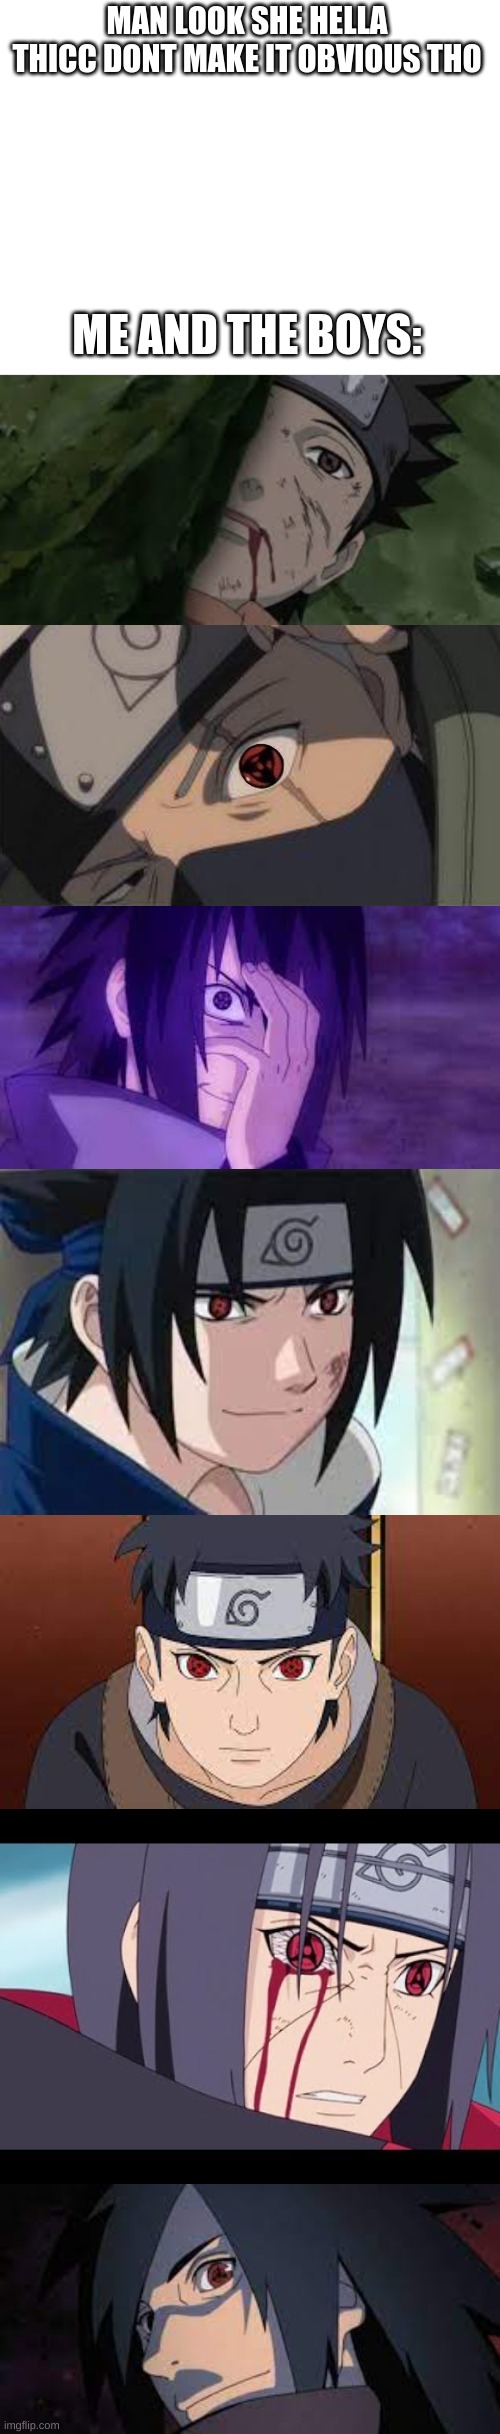 Don't ask why I used Sasuke.Twice |  MAN LOOK SHE HELLA THICC DONT MAKE IT OBVIOUS THO; ME AND THE BOYS: | image tagged in naruto,memes,sharingan,mangekyo | made w/ Imgflip meme maker